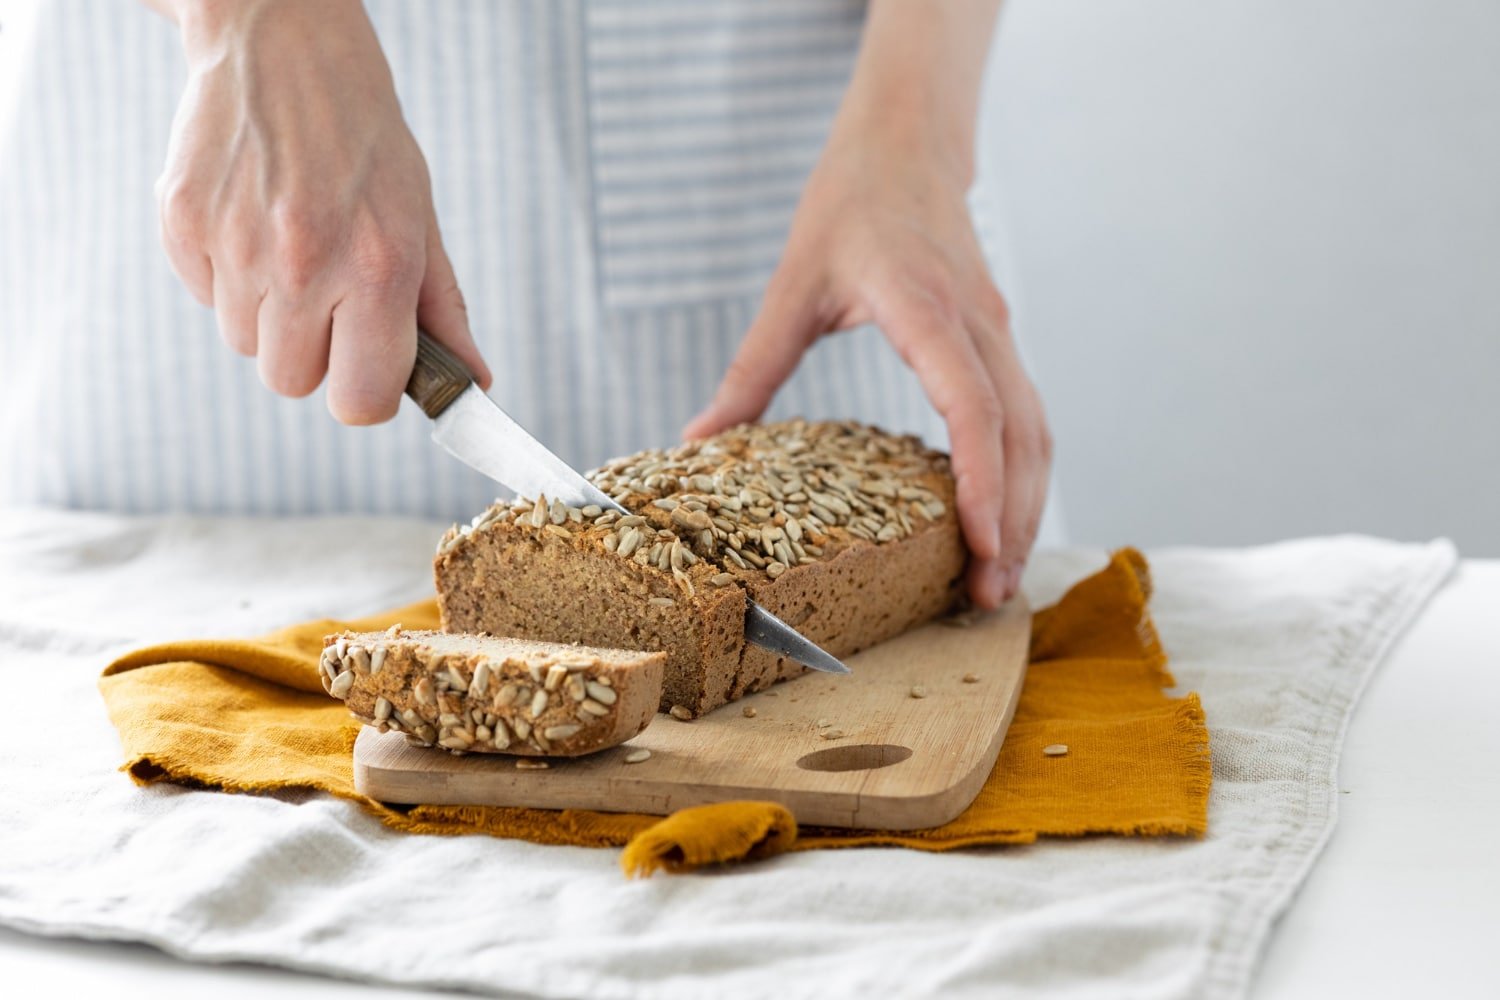 Eat Healthily with Hero Bread’s Low-Carb Bread